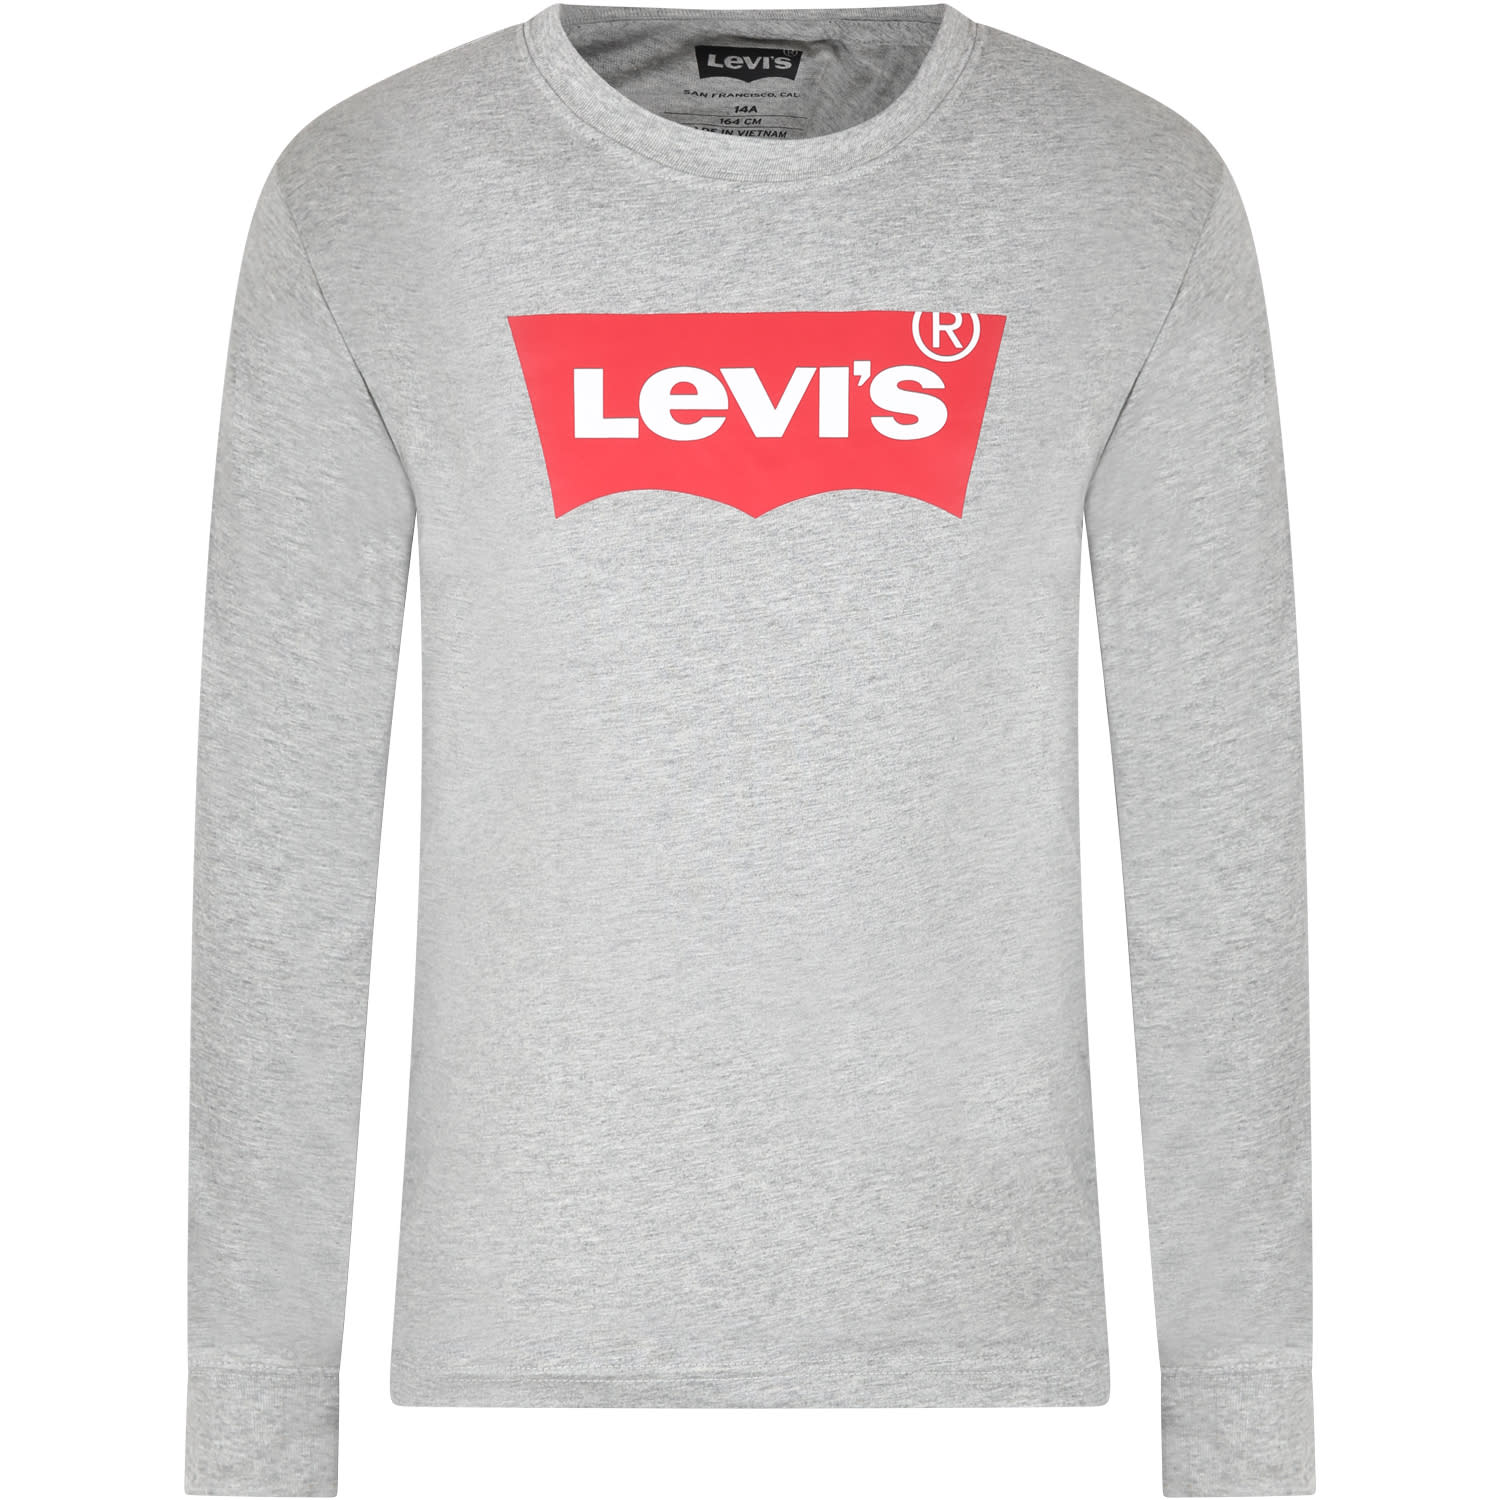 Levi's Kids' Grey T-shirt For Boy With Logo